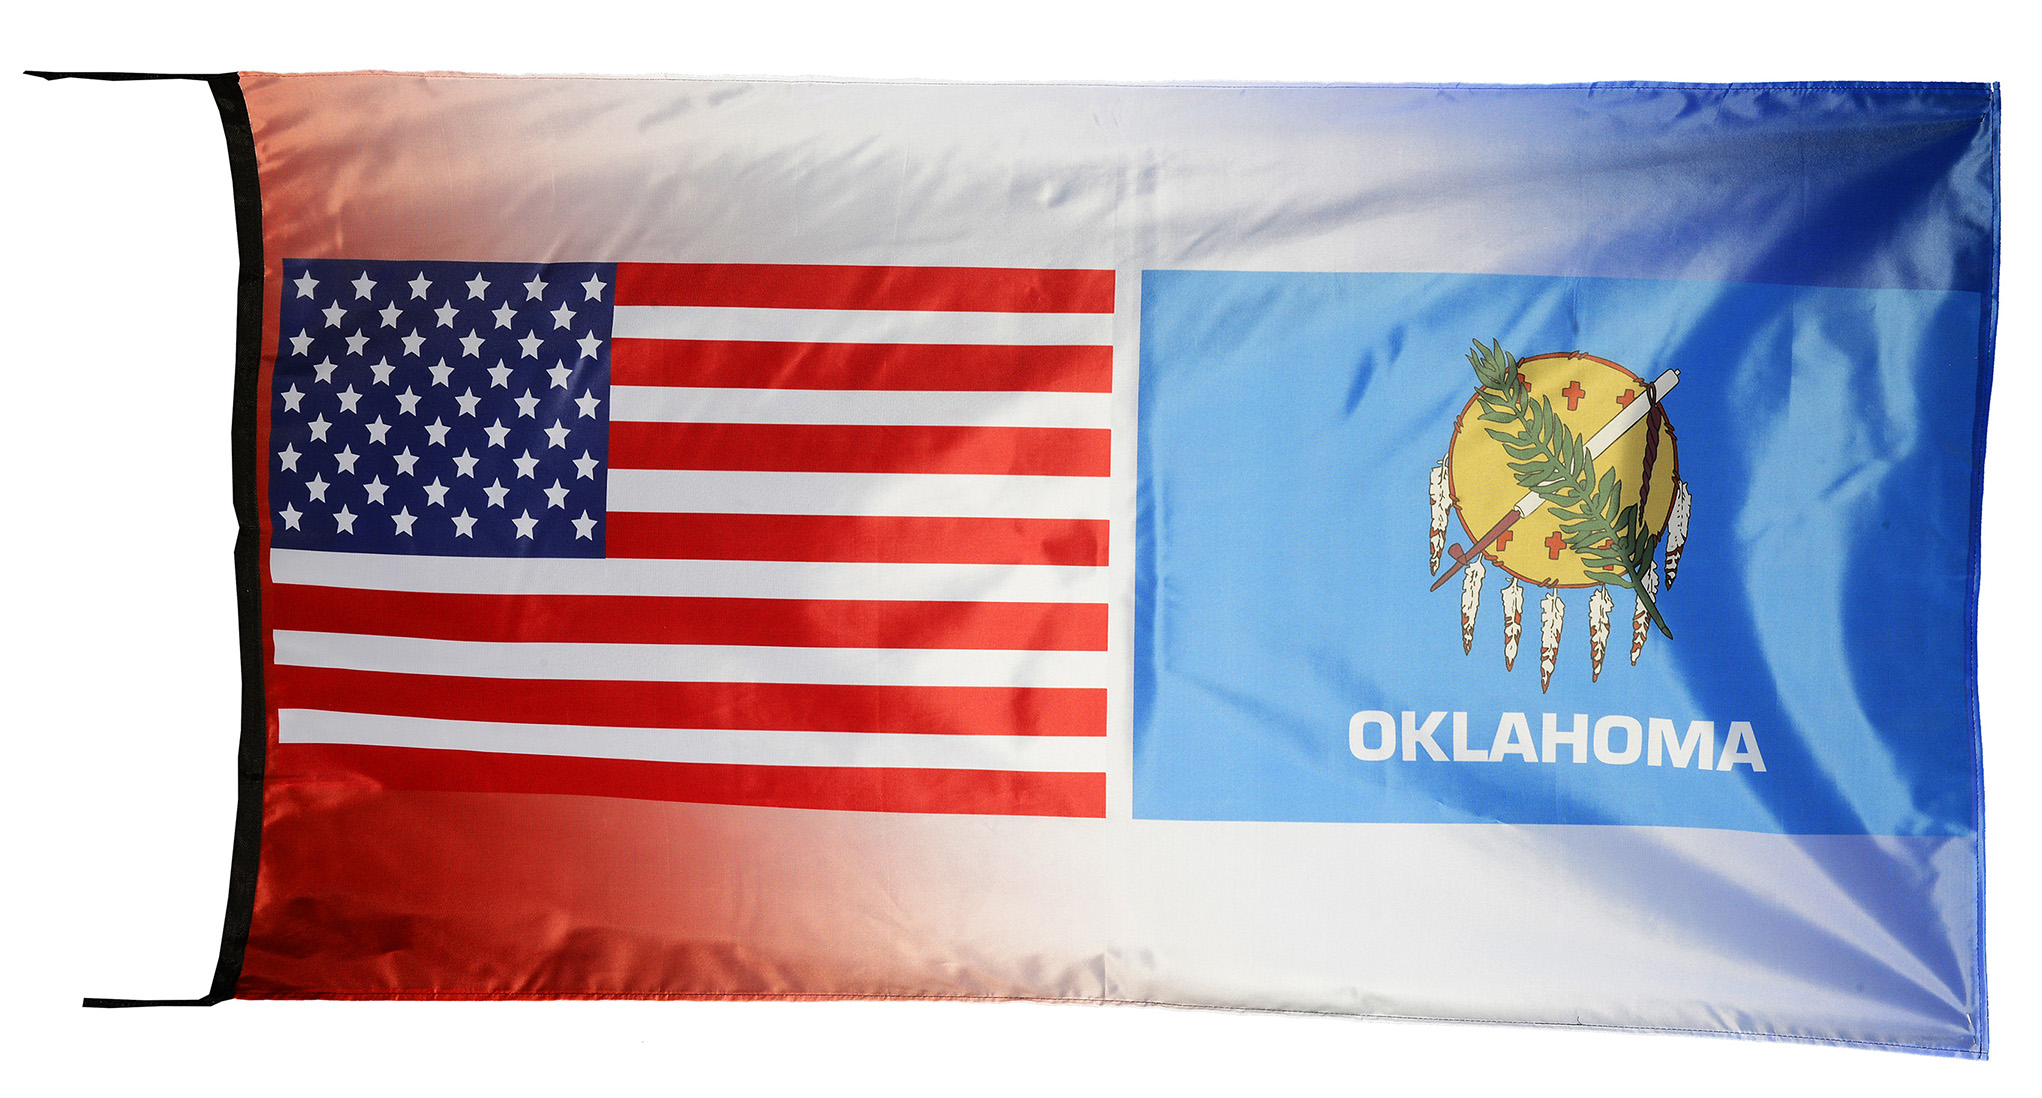 Flag  105 USA / US Country / United States Of America and Alabama State / Patriotic / Pride Hybrid Weather-Resistant Polyester Outdoor Flag Landscape Banner / Vivid Colors / 3 X 5 FT (150 x 90cm) International Flags for Sale